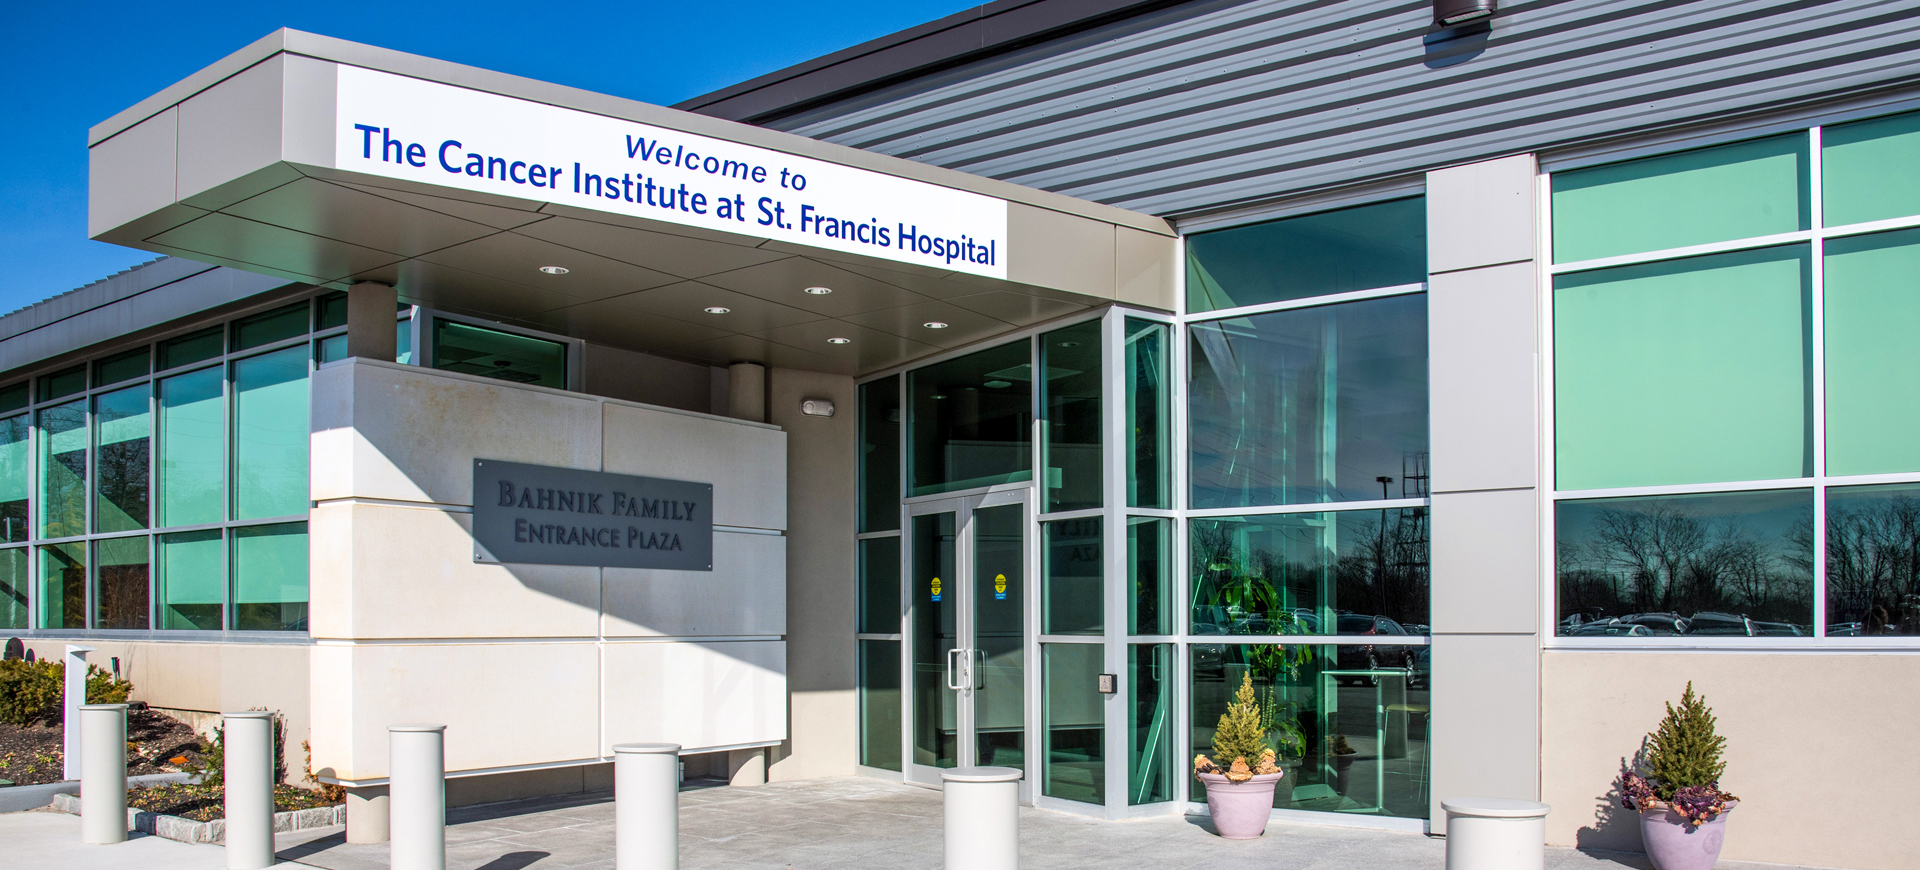       	        
	  	  The Cancer Institute at St. Francis Hospital
	  	  
	        